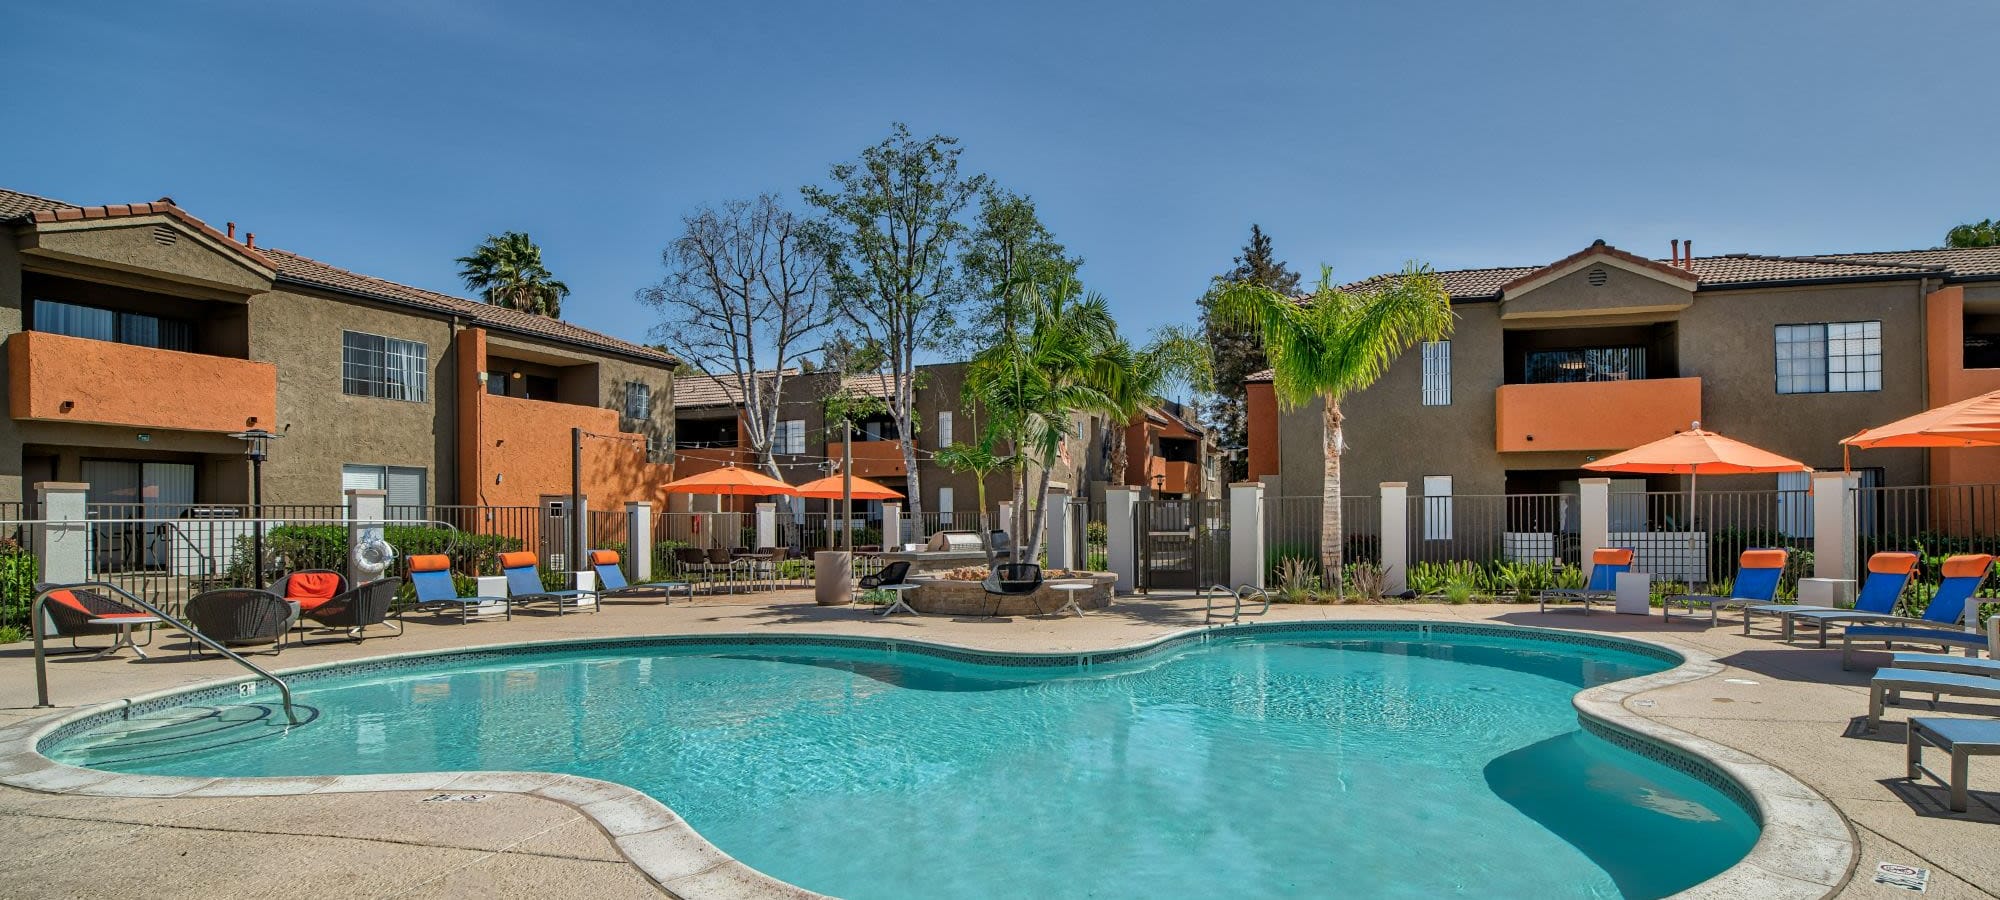 Luxurious pool side patio with sun chairs at The Ranch at Moorpark, Moorpark, California